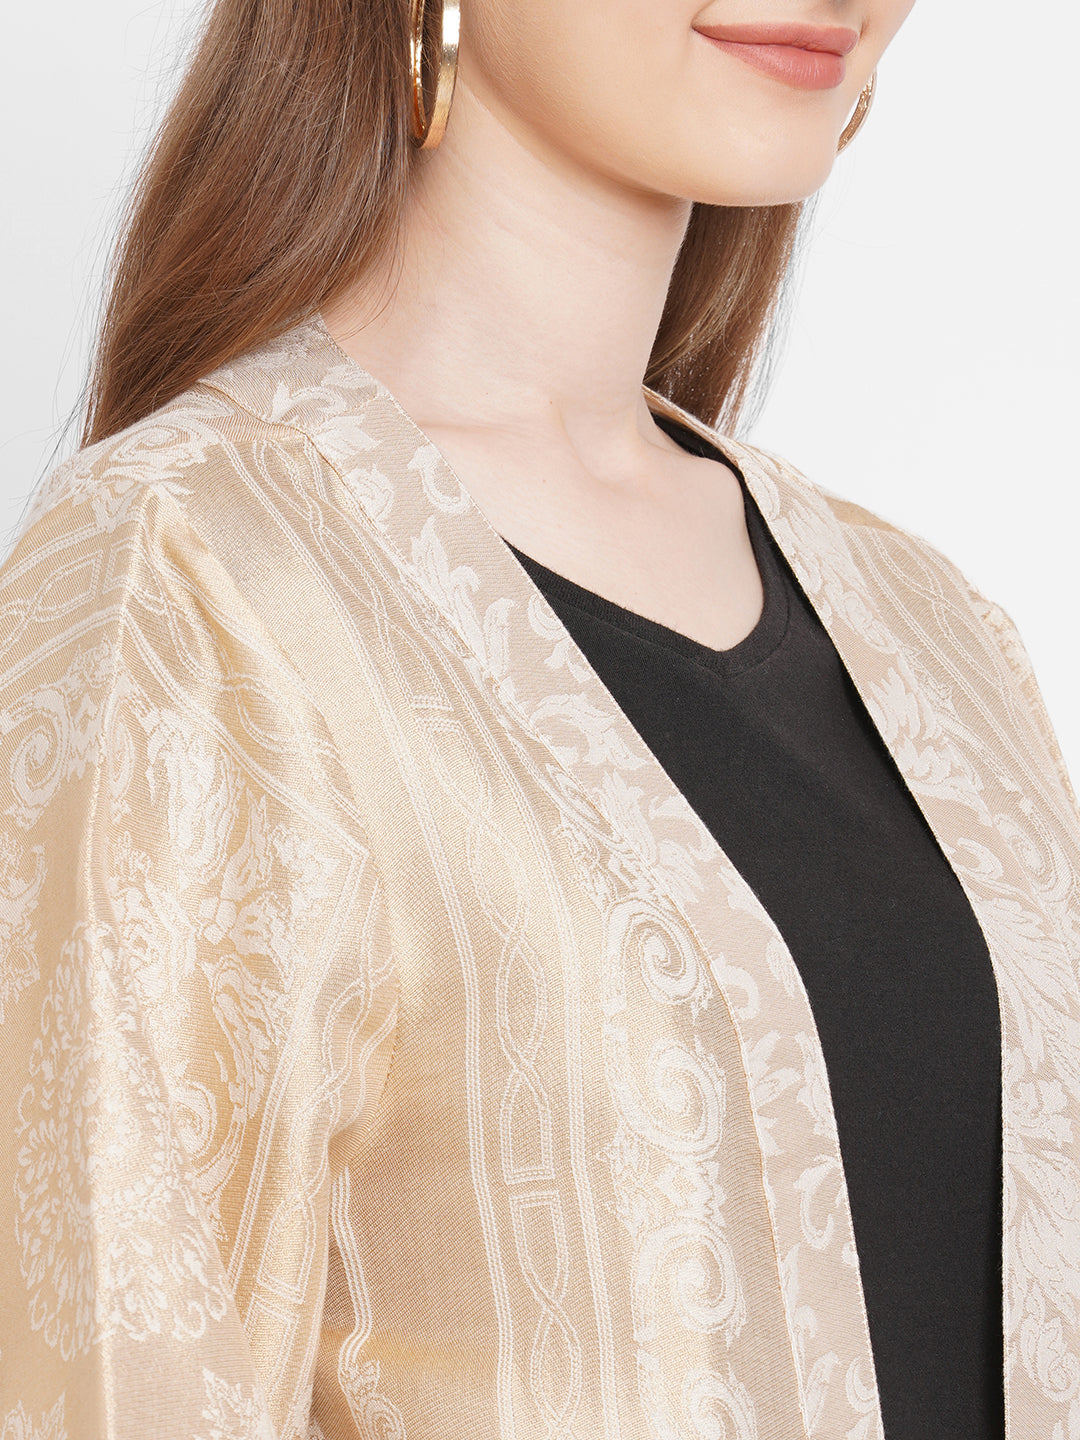 Brocade Off white French Patterned Jacket